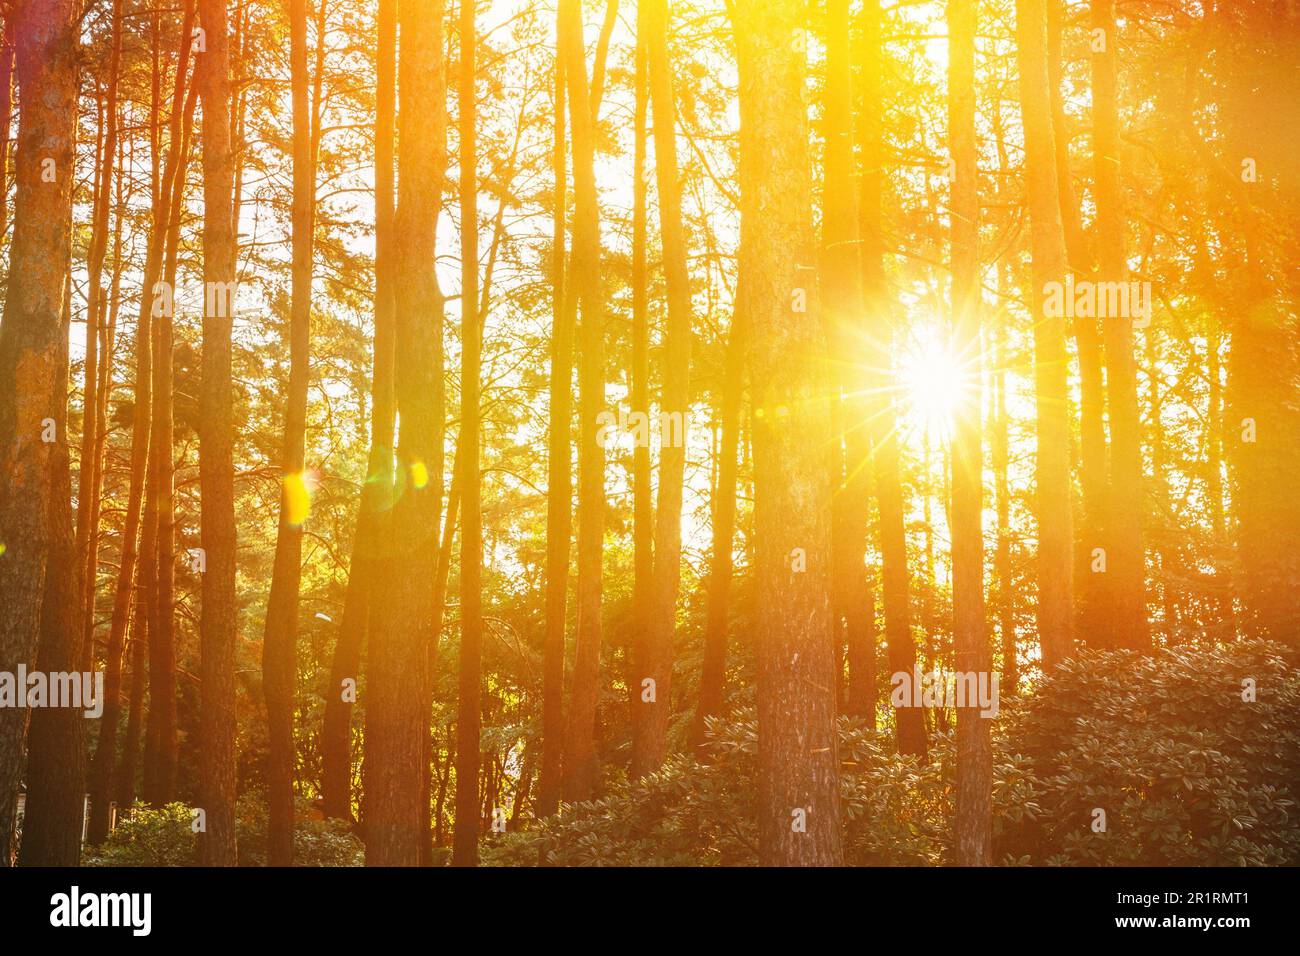 Sunset Sunrise In Pine Forest Landscape. Sun Sunshine With Natural Sunlight Through Wood Tree In Evening Forest. Amazing Scenic View. Autumn Nature. Stock Photo